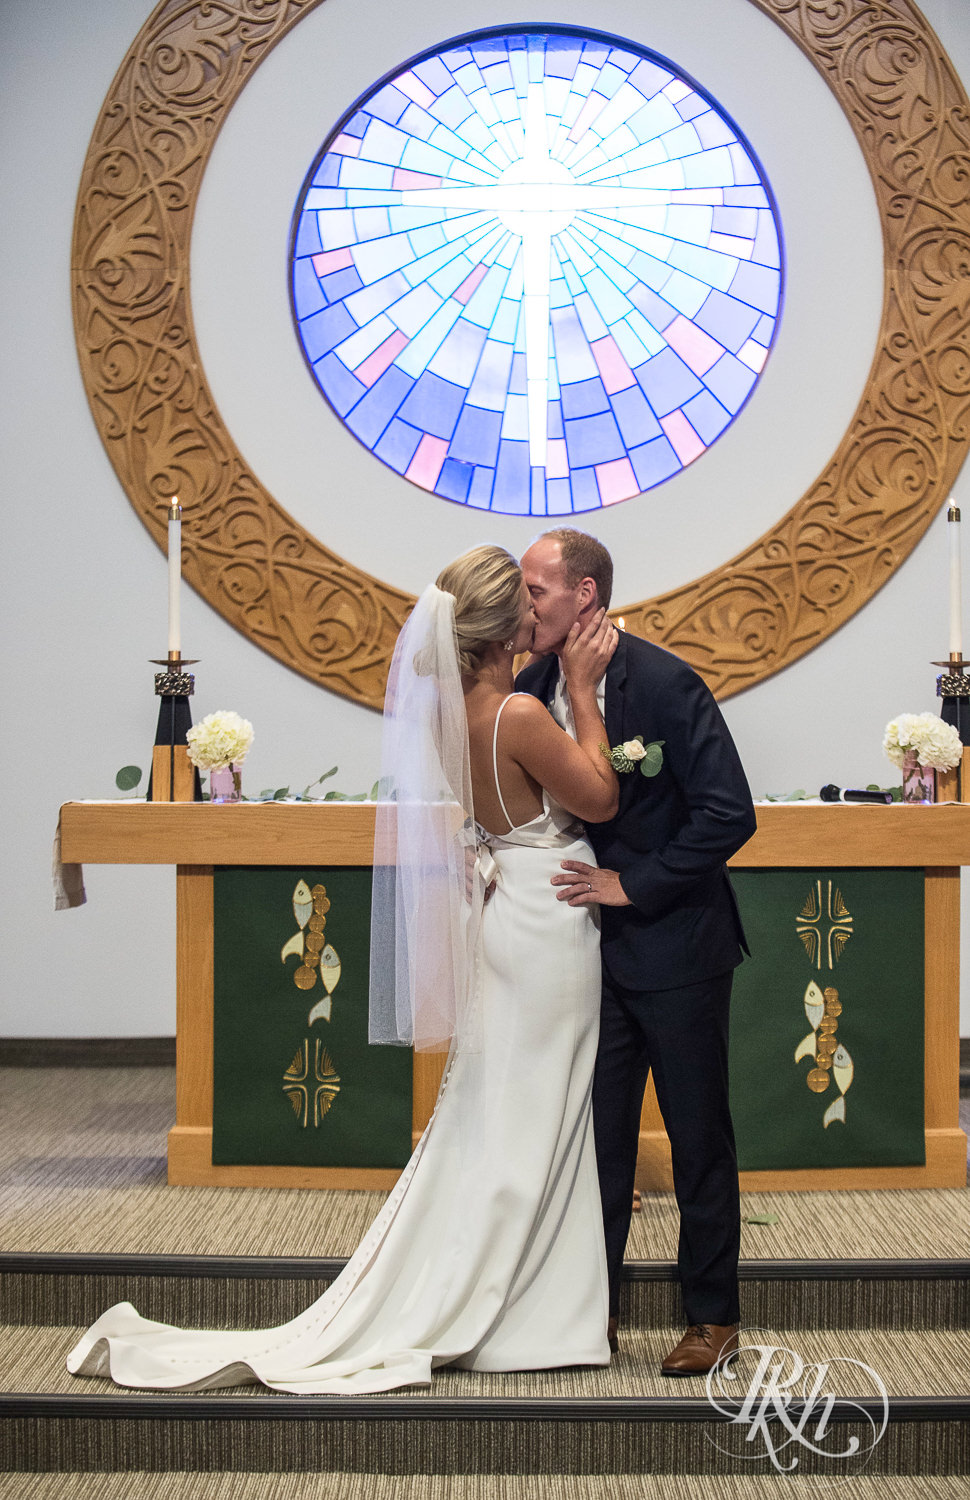 Bride and groom kiss during a church wedding ceremony in Minneapolis, Minnesota.